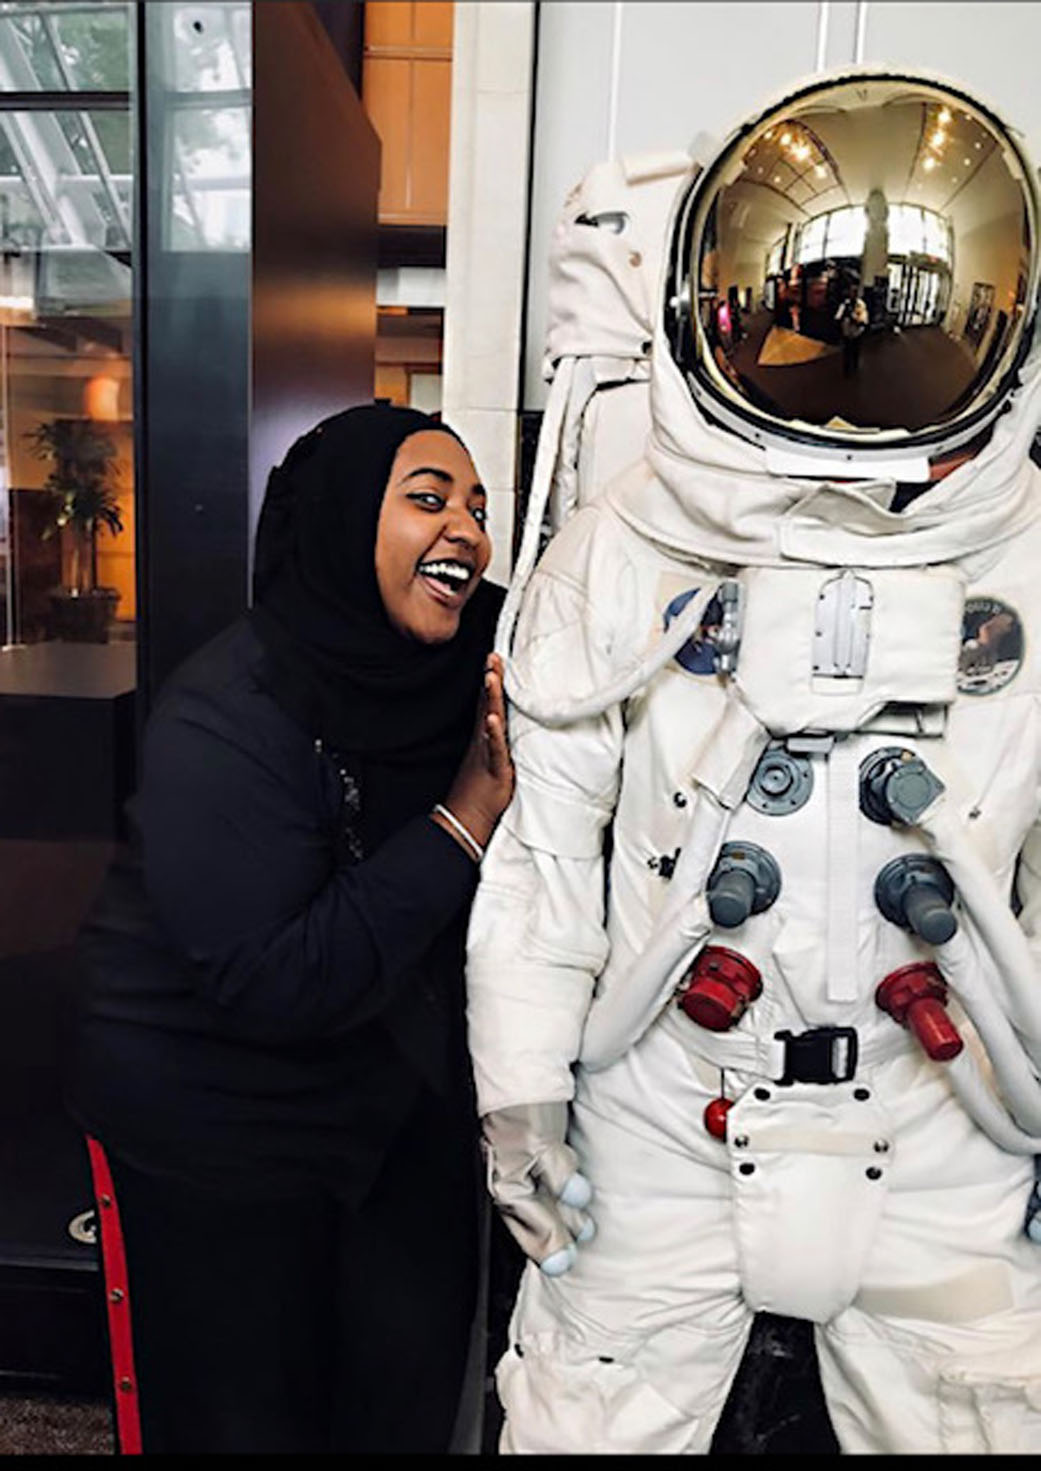 a Black woman wearing a black long-sleeved shirt and a black head covering smiles next to an astronaut suit. 